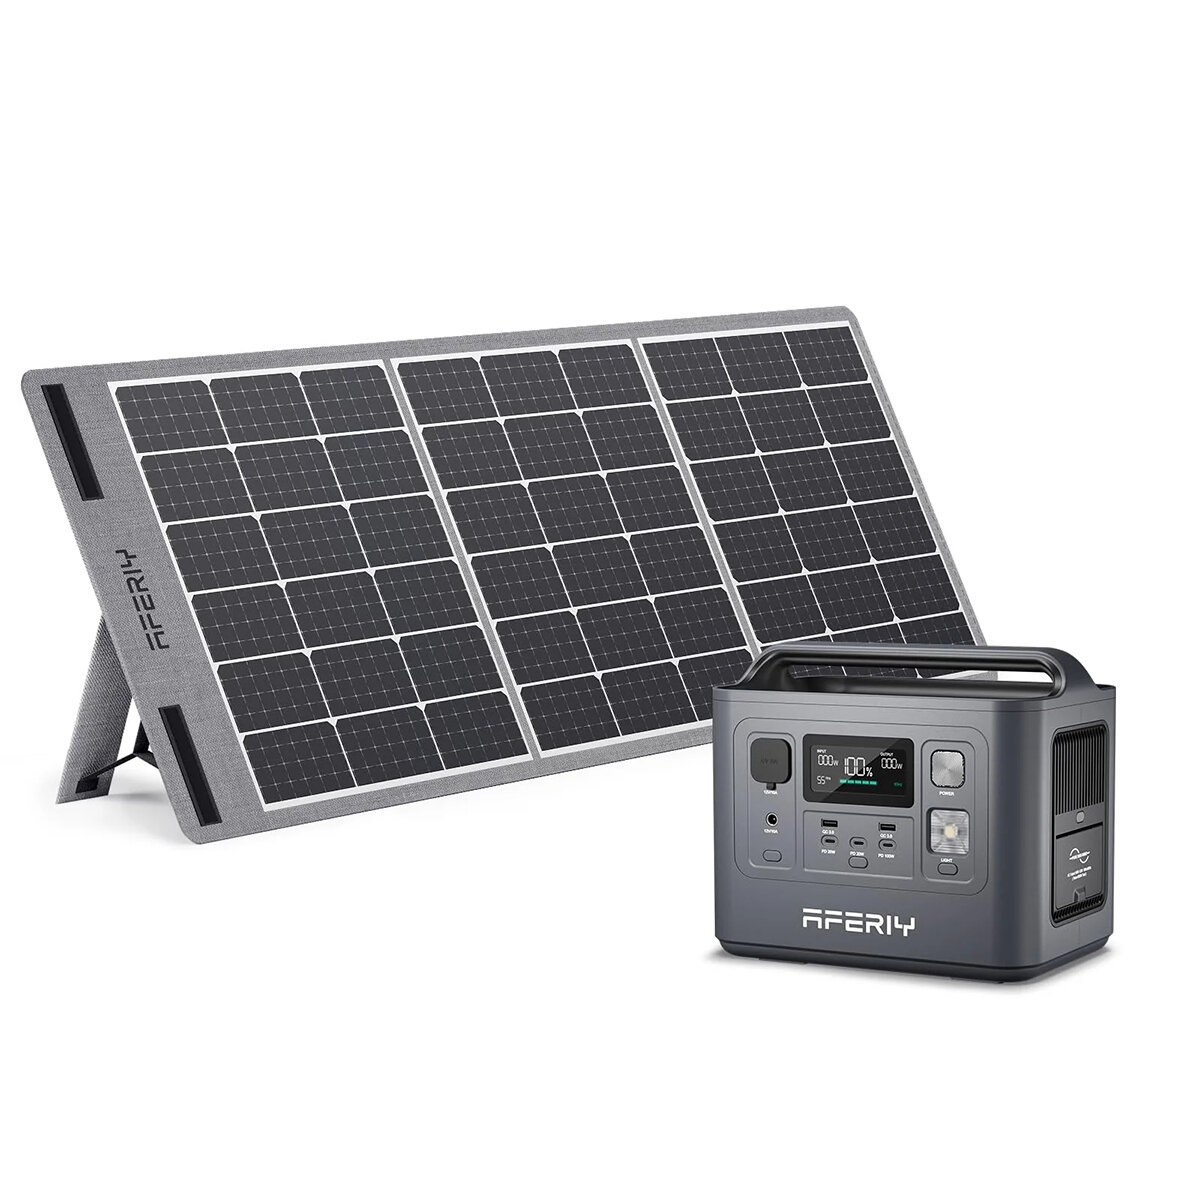 best price,aferiy,p010,800w,512wh,lifepo4,power,station,with,s100,100w,discount